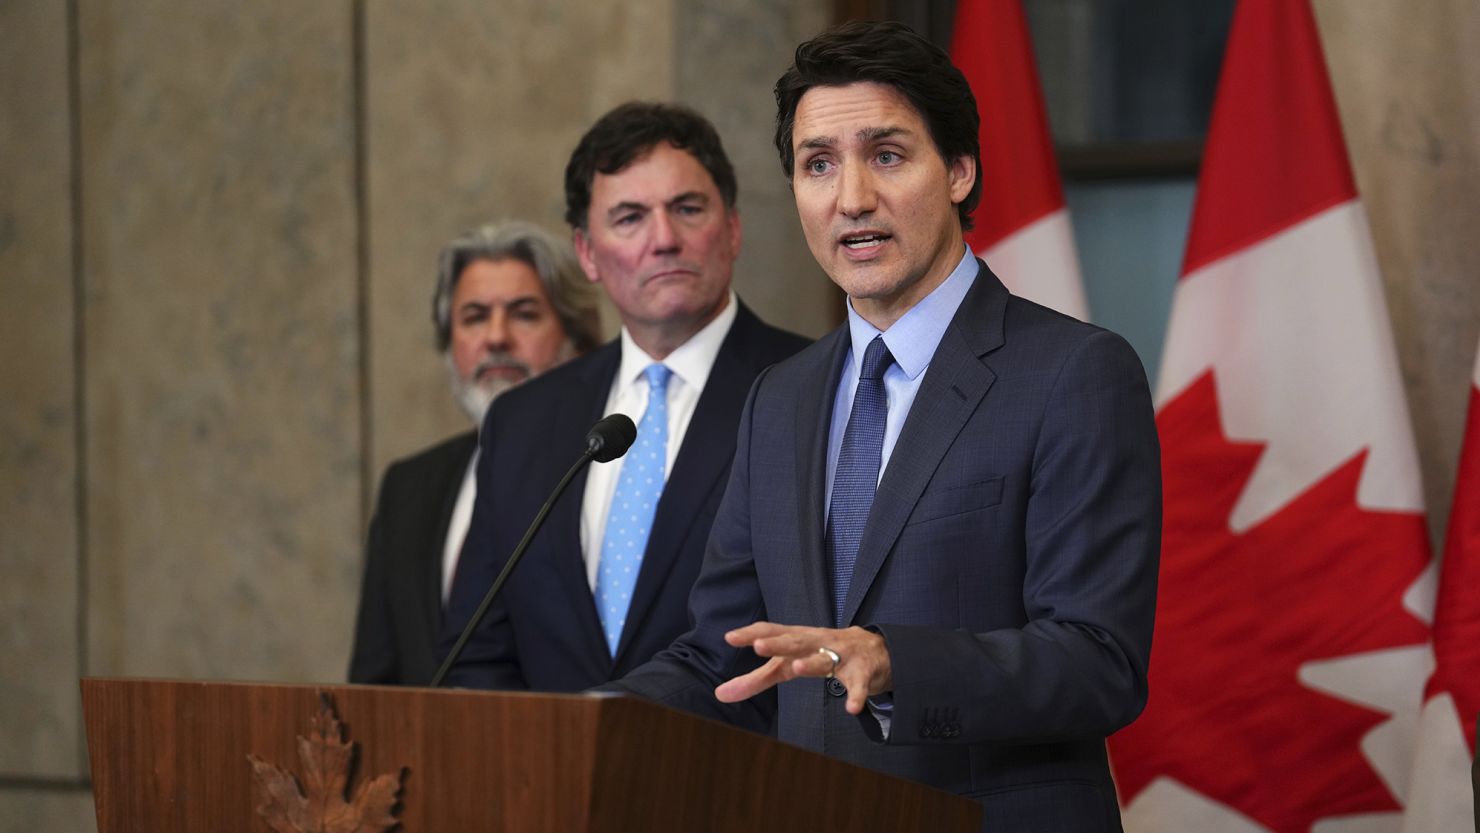 Canada's Prime Minister Justin Trudeau is under fire from opposition parties to immediately call a wide-ranging public inquiry into allegations of election interference. 